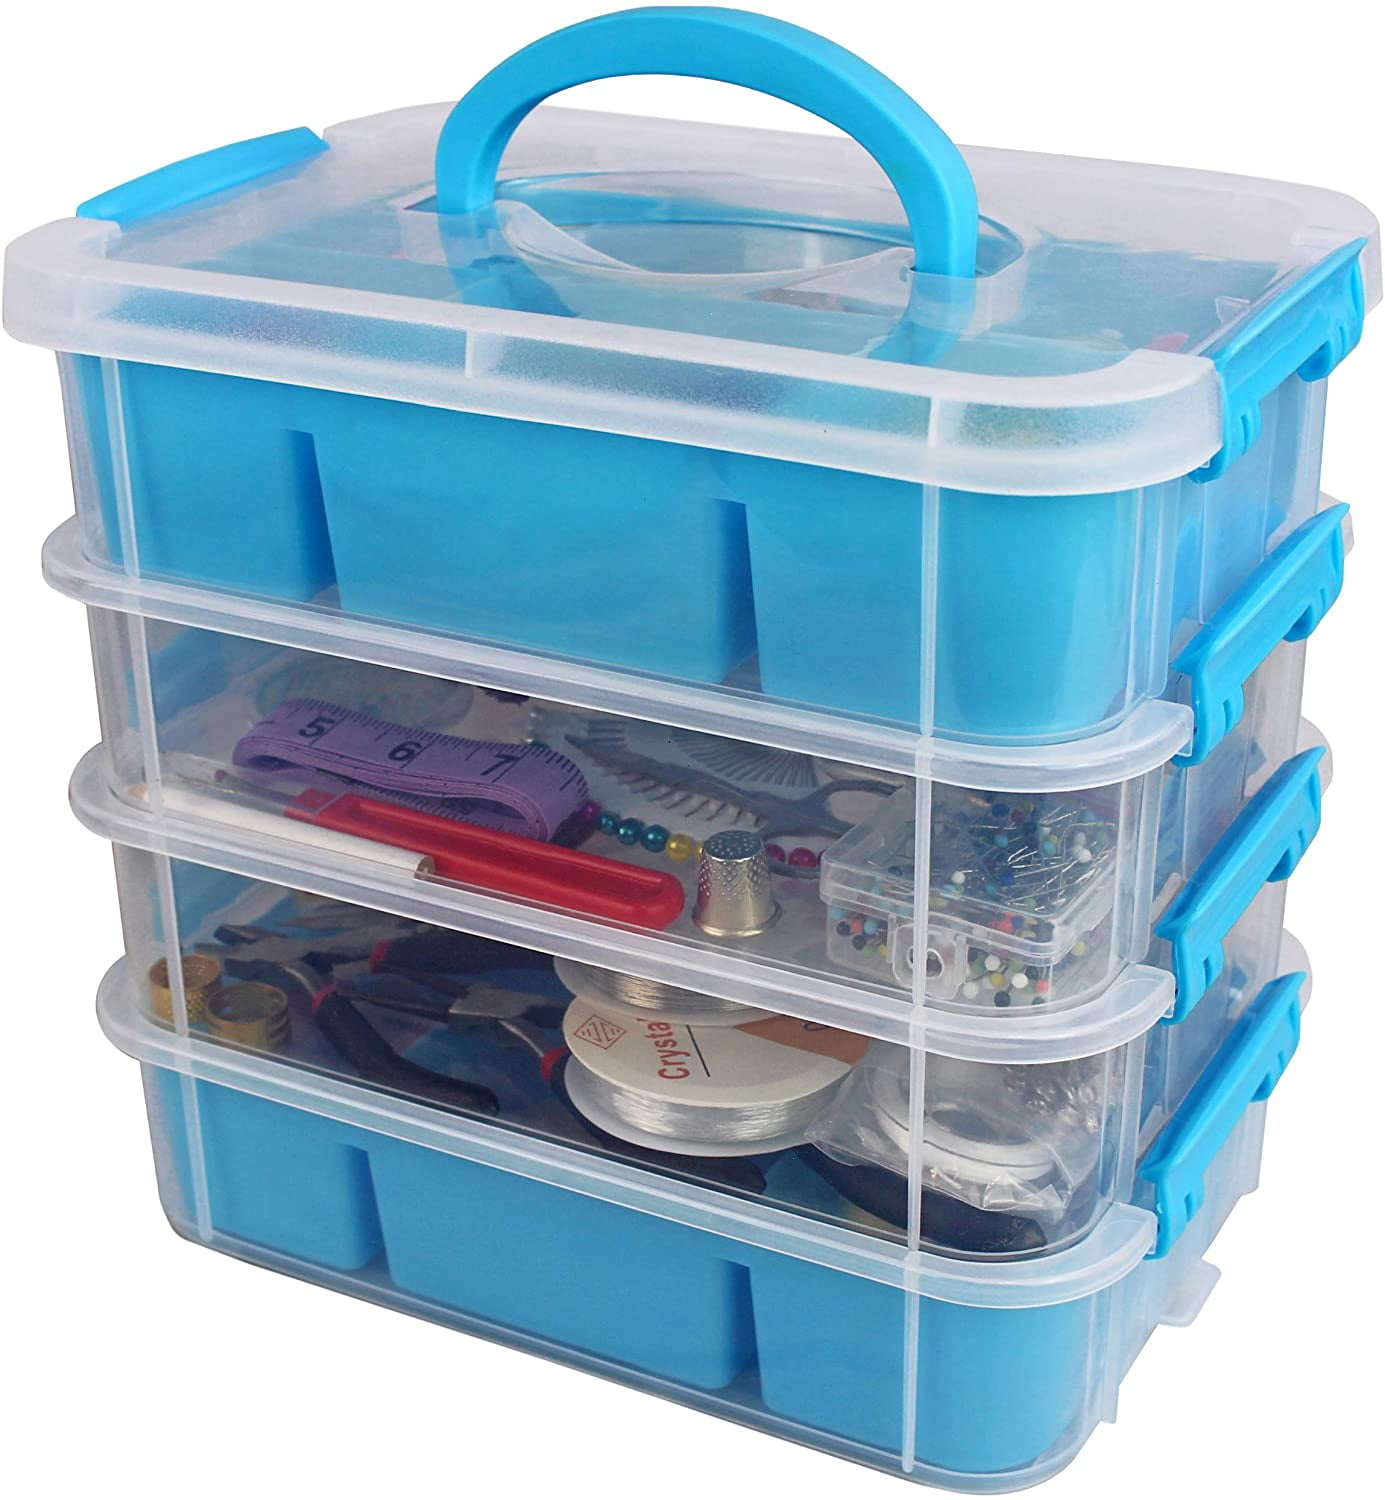 Stackable Plastic Craft Storage Containers by Bins & Things | Plastic  Storage Organizer Bin with 2 Trays | Bins for Arts Crafts Supplies |  Jewelry